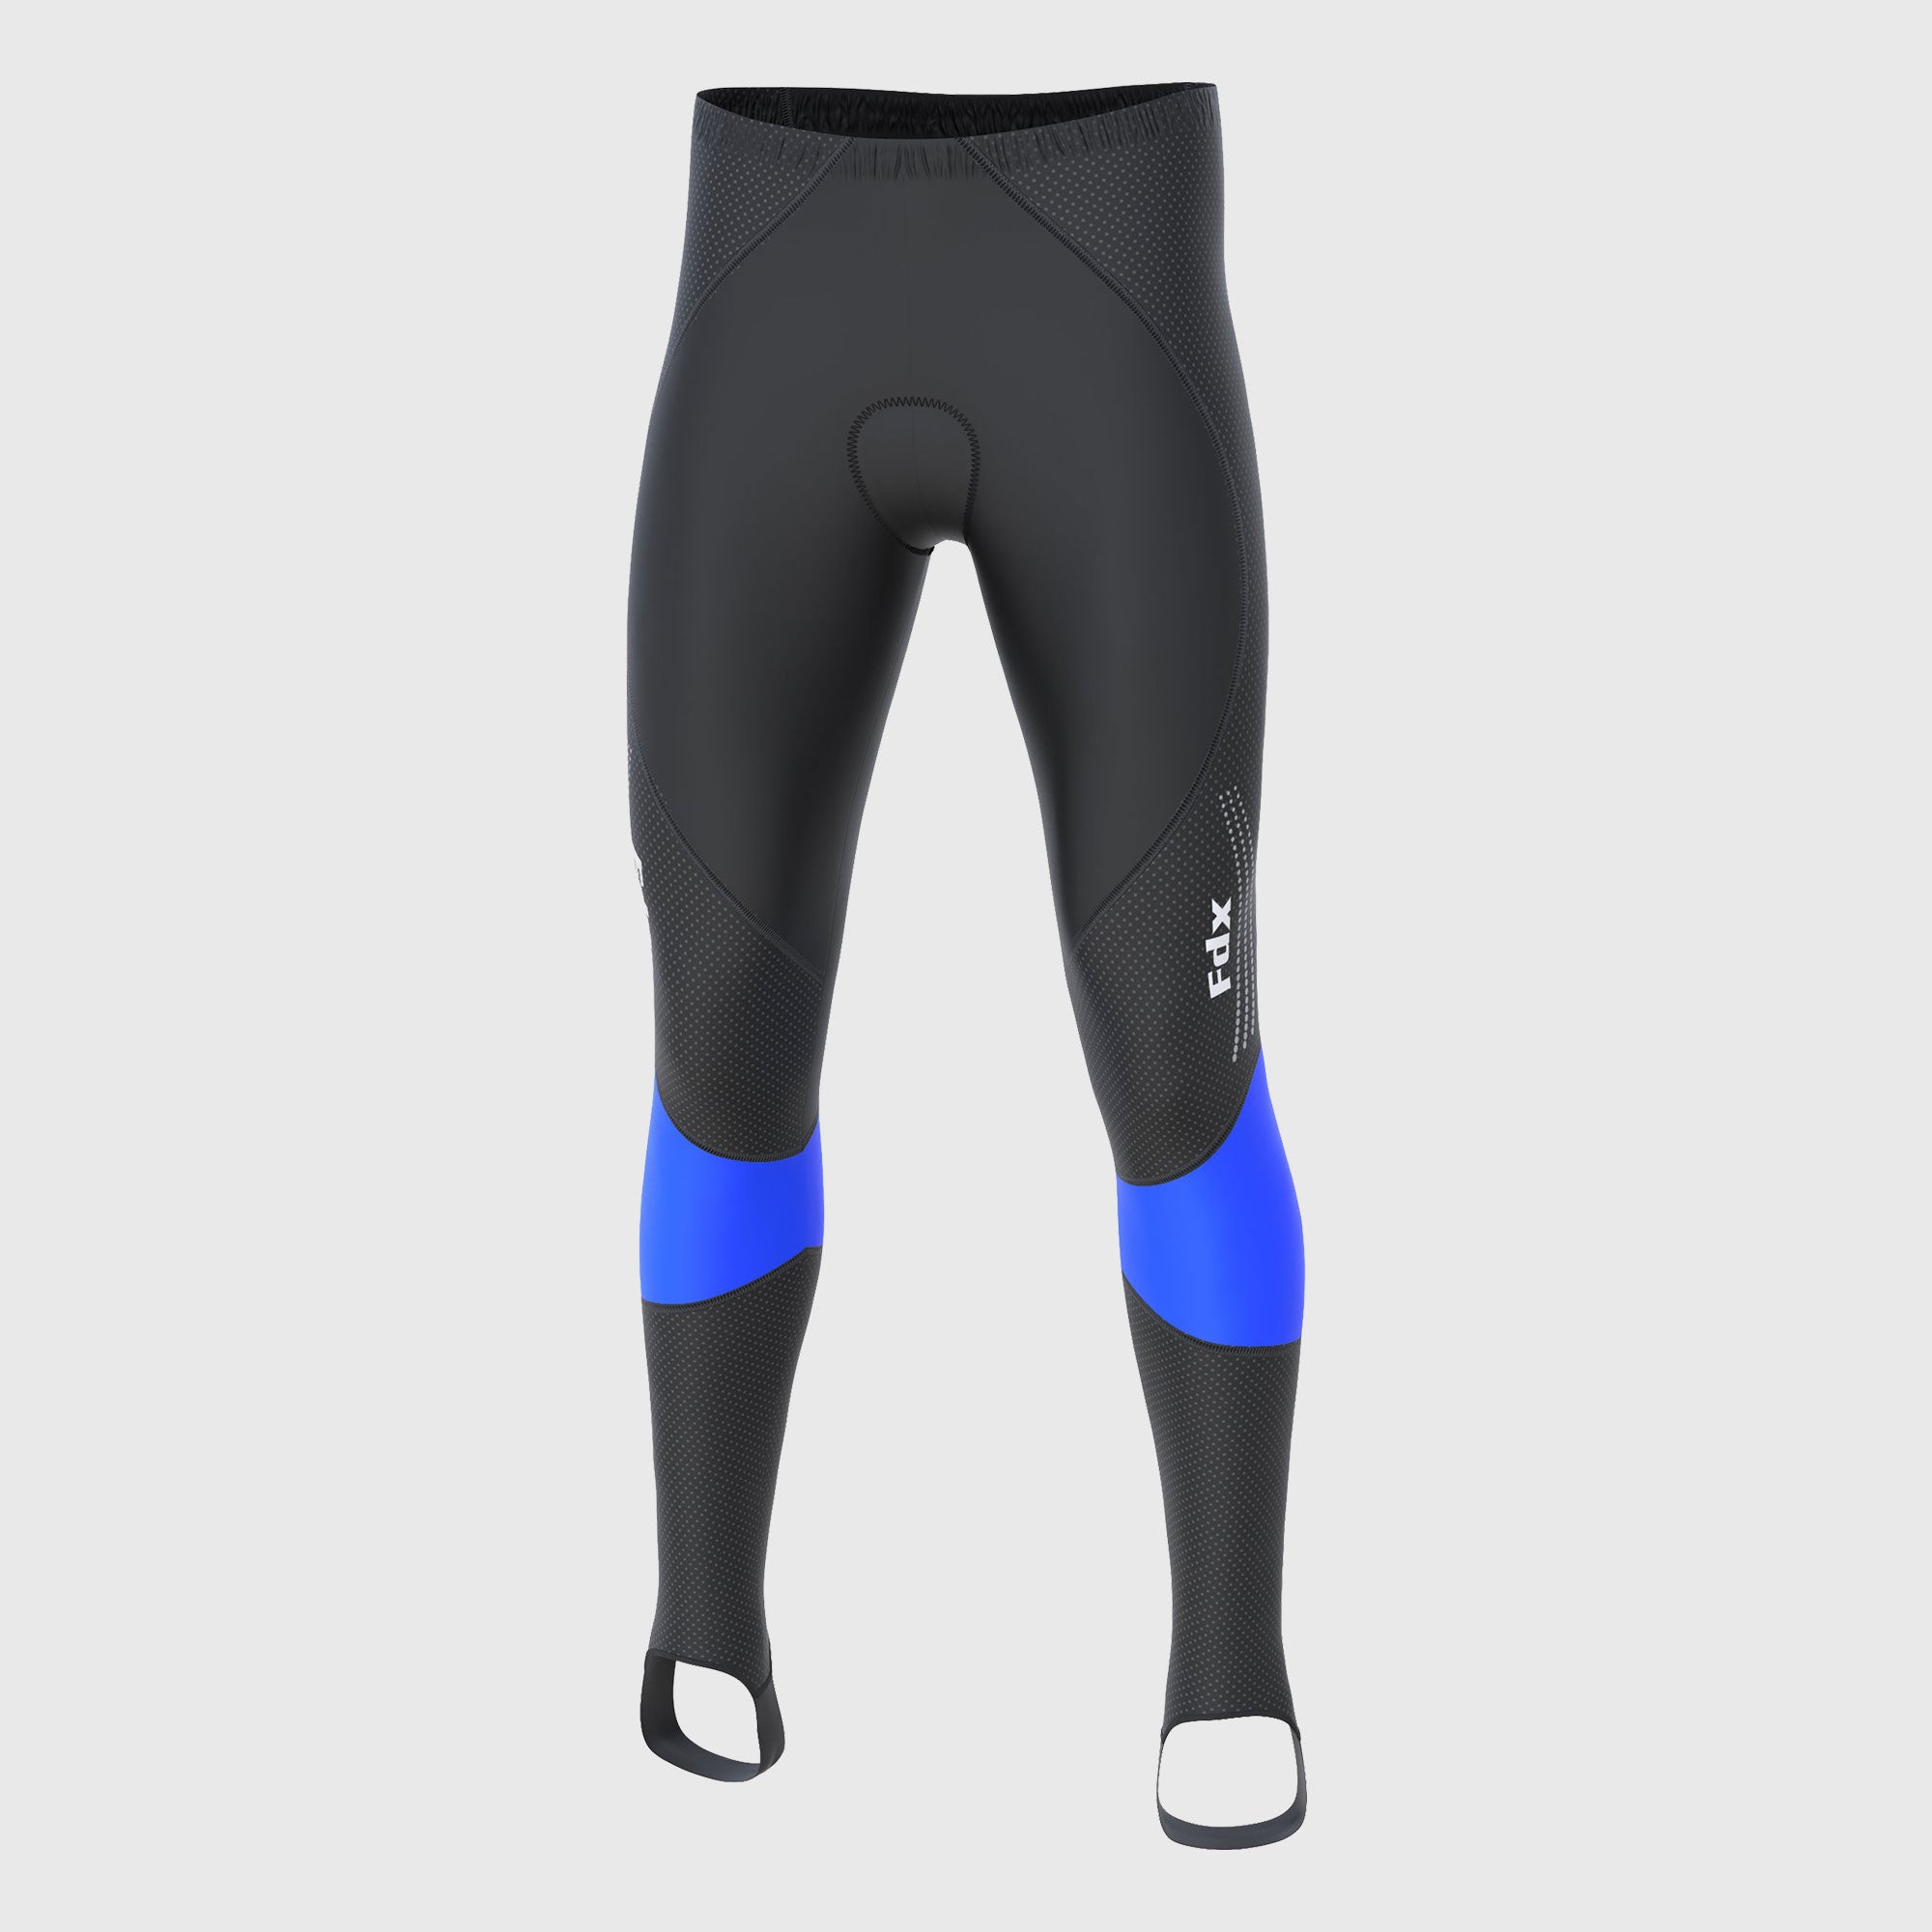 FDX Men?s Thermal Cycling Tights, 3D Padded, Water Resistant, Lightwei –